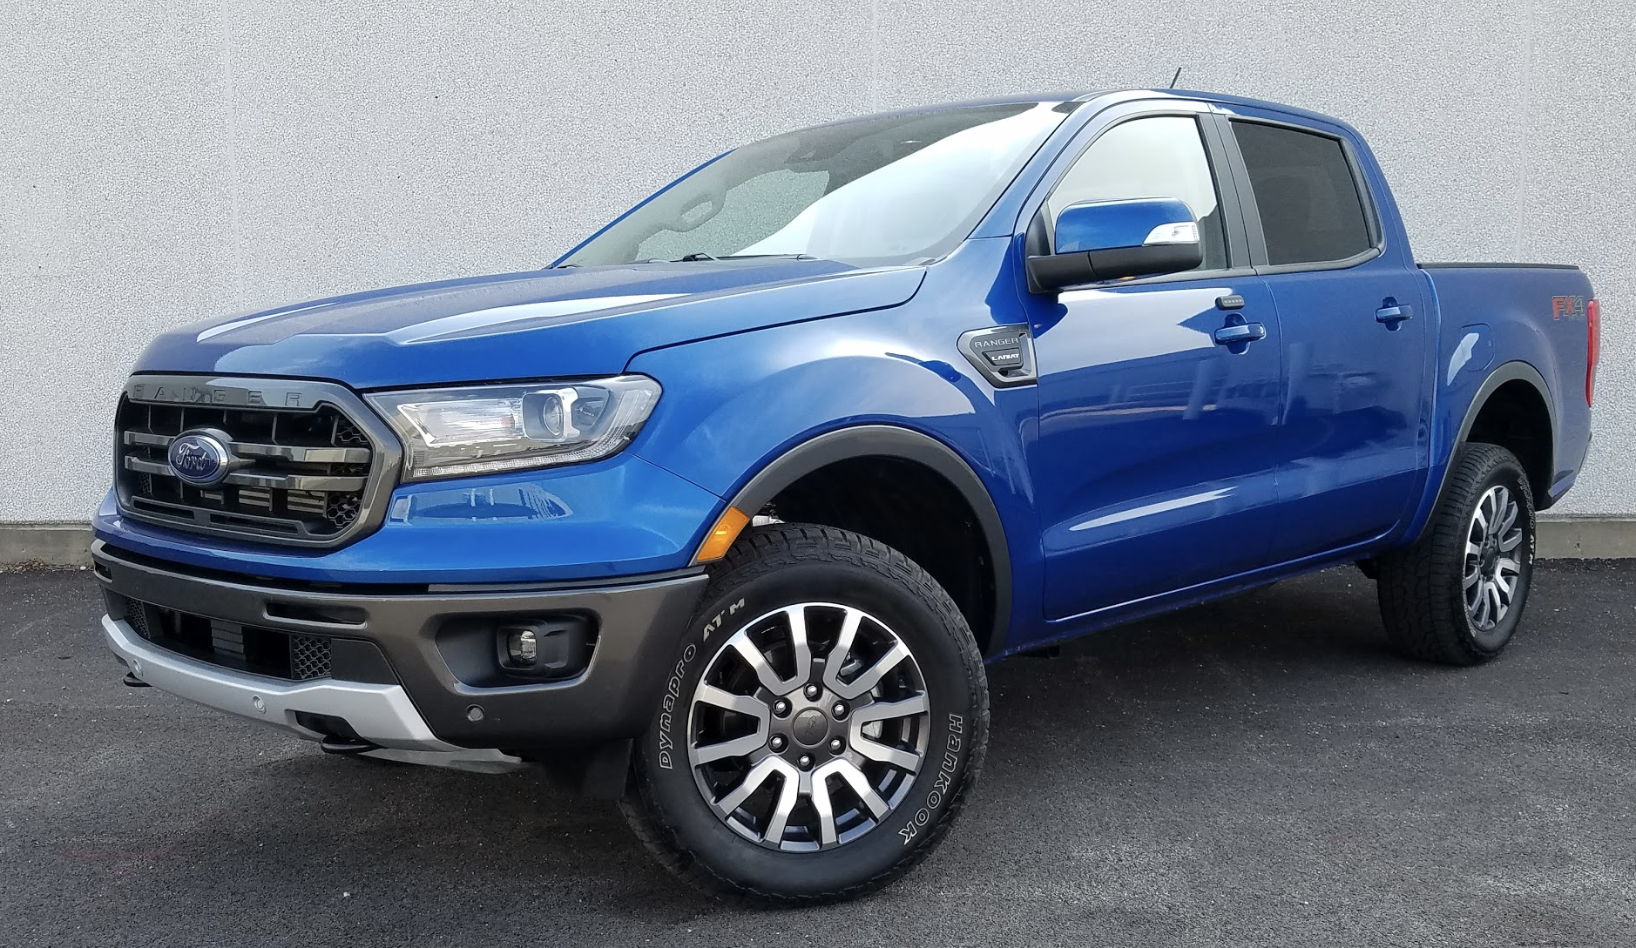 2019 Ford Ranger Lariat The Daily Drive | Consumer Guide®